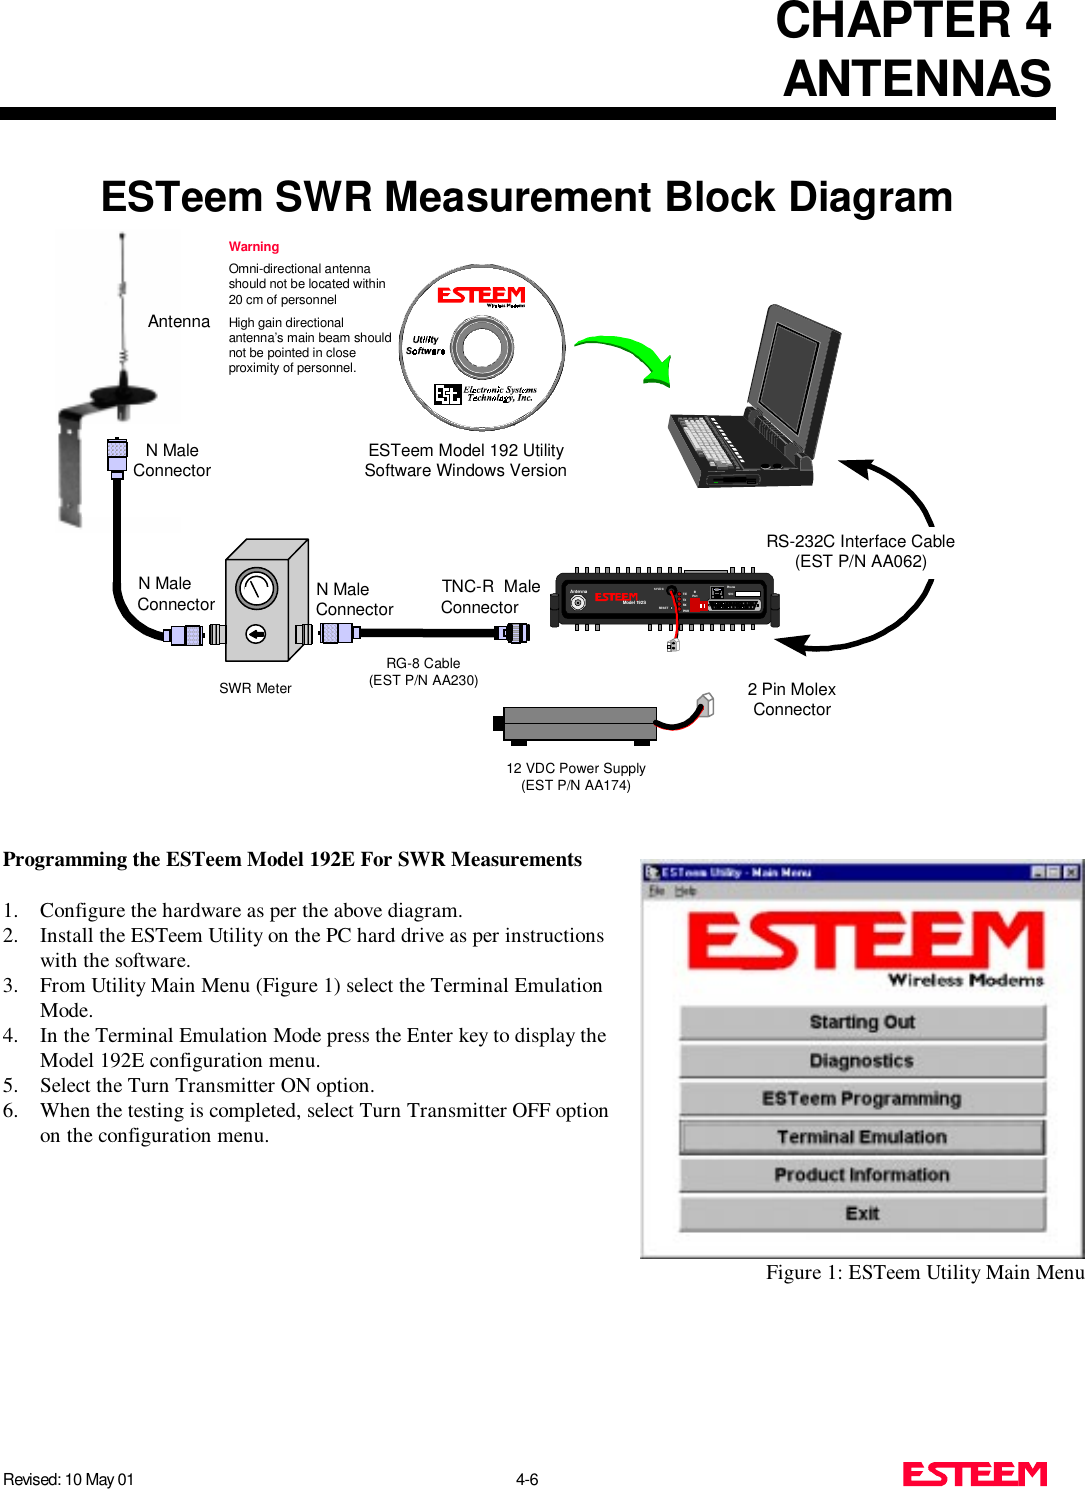 CHAPTER 4ANTENNASRevised: 10 May 01 4-6ESTeem SWR Measurement Block DiagramProgramming the ESTeem Model 192E For SWR Measurements1. Configure the hardware as per the above diagram.2. Install the ESTeem Utility on the PC hard drive as per instructionswith the software.3. From Utility Main Menu (Figure 1) select the Terminal EmulationMode.4. In the Terminal Emulation Mode press the Enter key to display theModel 192E configuration menu.5. Select the Turn Transmitter ON option.6. When the testing is completed, select Turn Transmitter OFF optionon the configuration menu.      Figure 1: ESTeem Utility Main MenuN MaleConnector N MaleConnectorTNC-R  MaleConnectorAntenna2 Pin MolexConnectorRS-232C Interface Cable(EST P/N AA062)N MaleConnectorSWR MeterRG-8 Cable(EST P/N AA230)12 VDC Power Supply(EST P/N AA174)S/ N:T/ETXRXPW RIRPo rtPhoneModel 192SAntenna 12 V D CRESETESTeem Model 192 UtilitySoftware Windows VersionWarningOmni-directional antennashould not be located within20 cm of personnelHigh gain directionalantenna’s main beam shouldnot be pointed in closeproximity of personnel.